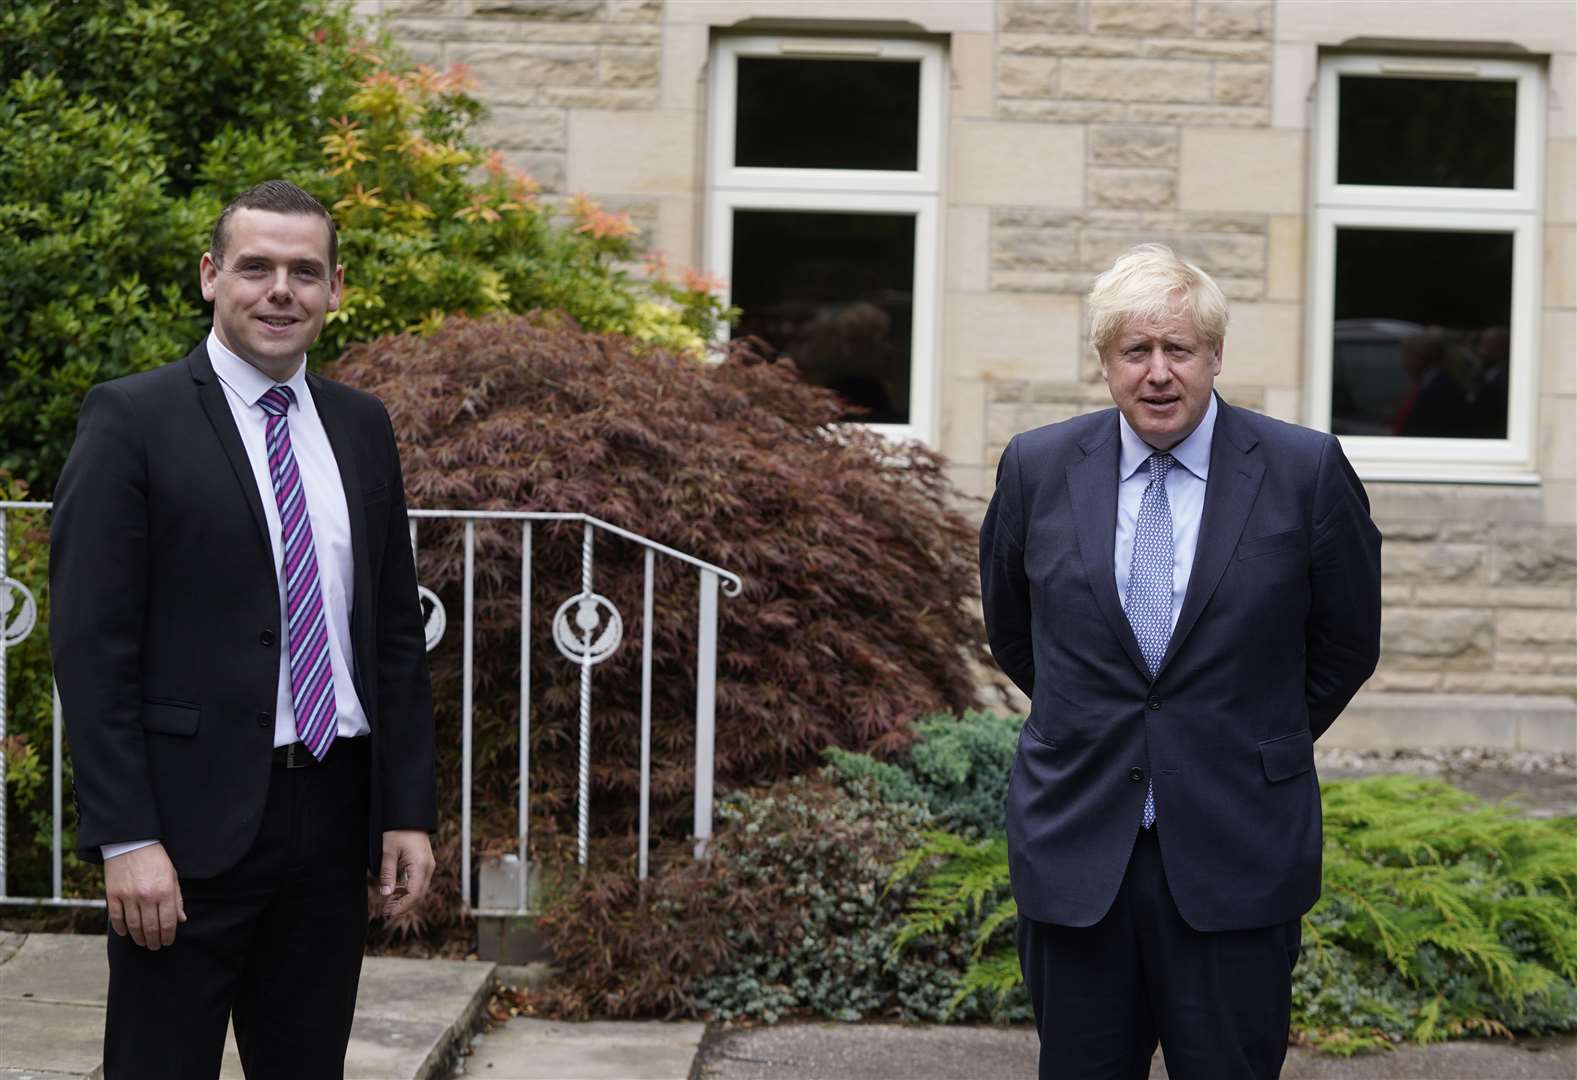 Douglas Ross said if PM Boris Johnson is found to have misled parliament then he must resign.